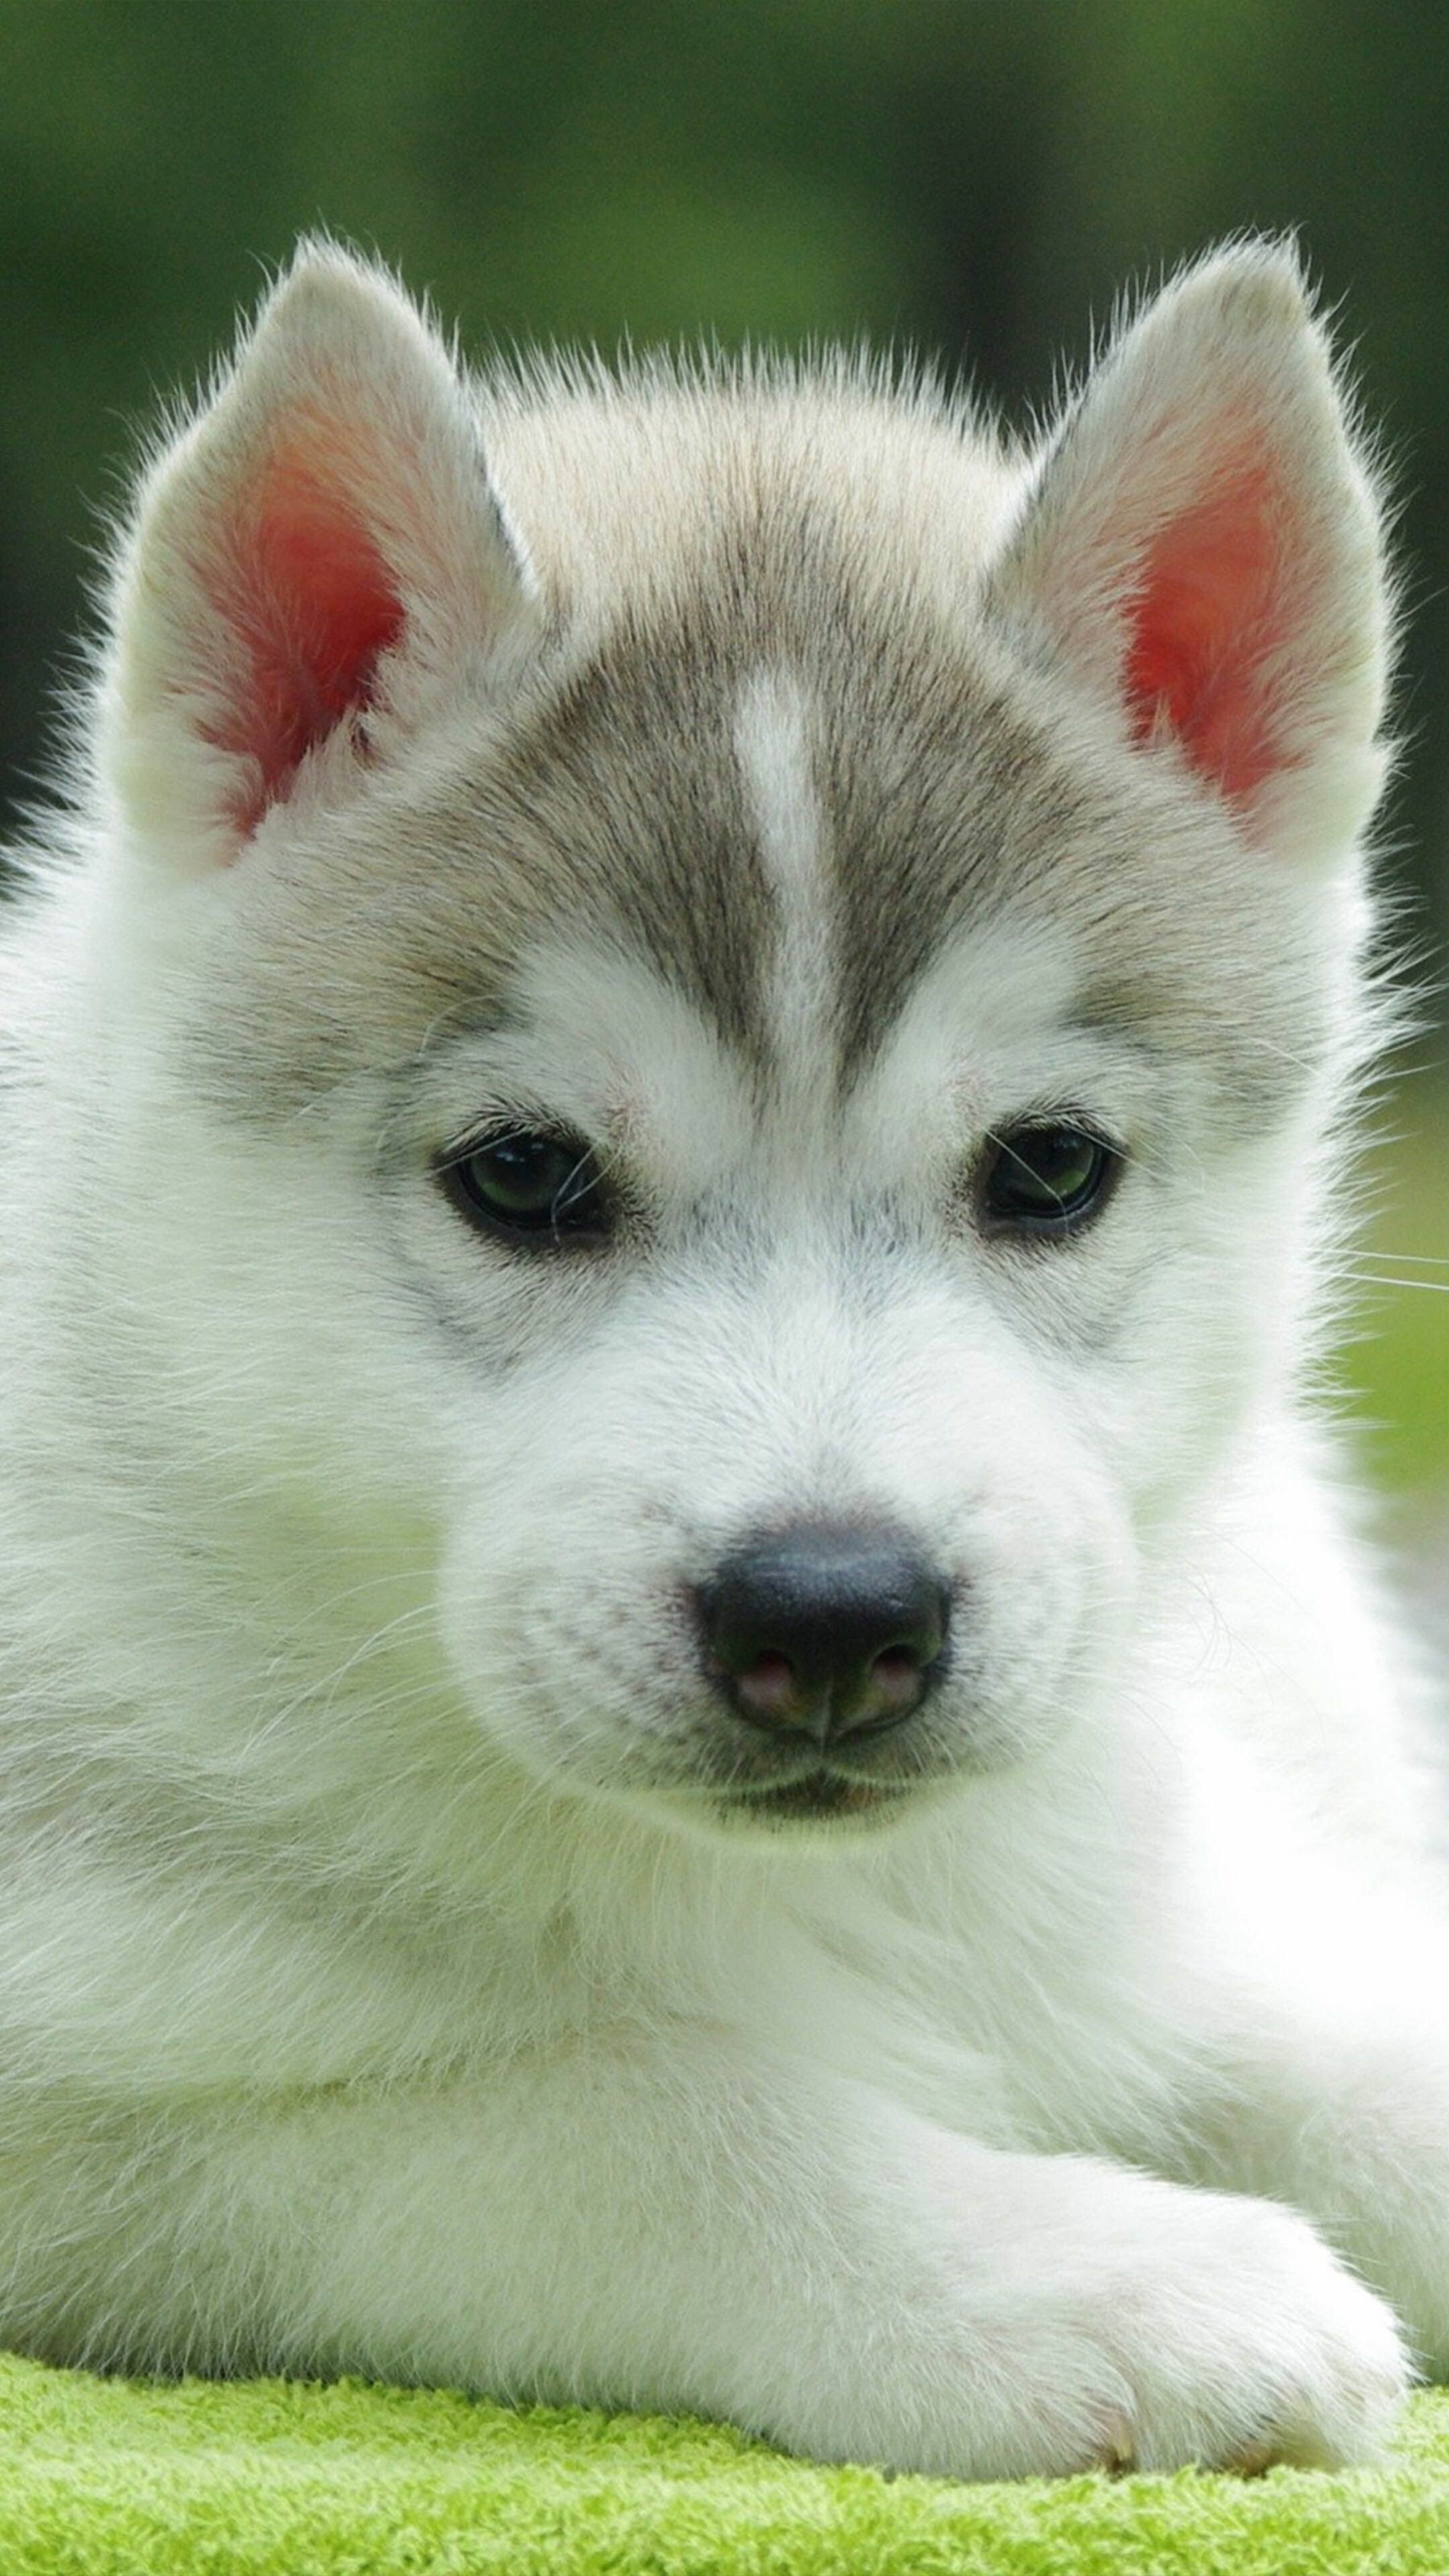 Siberian Husky: Cute puppy, An active, energetic, resilient breed. 2160x3840 4K Wallpaper.